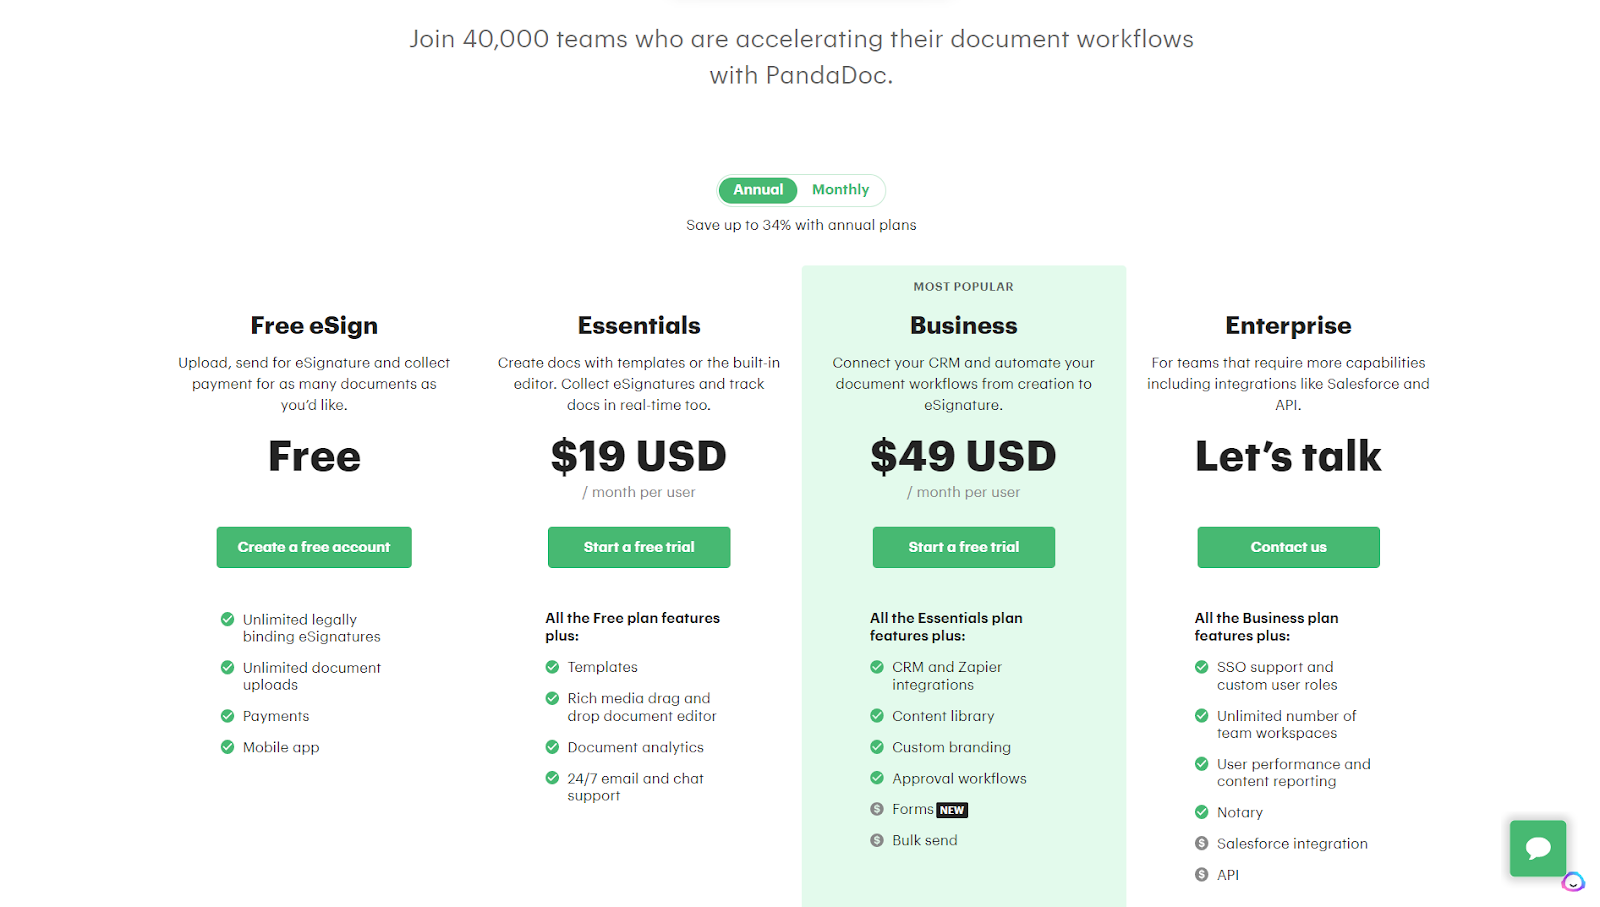 Image of the PandaDoc Pricing Page